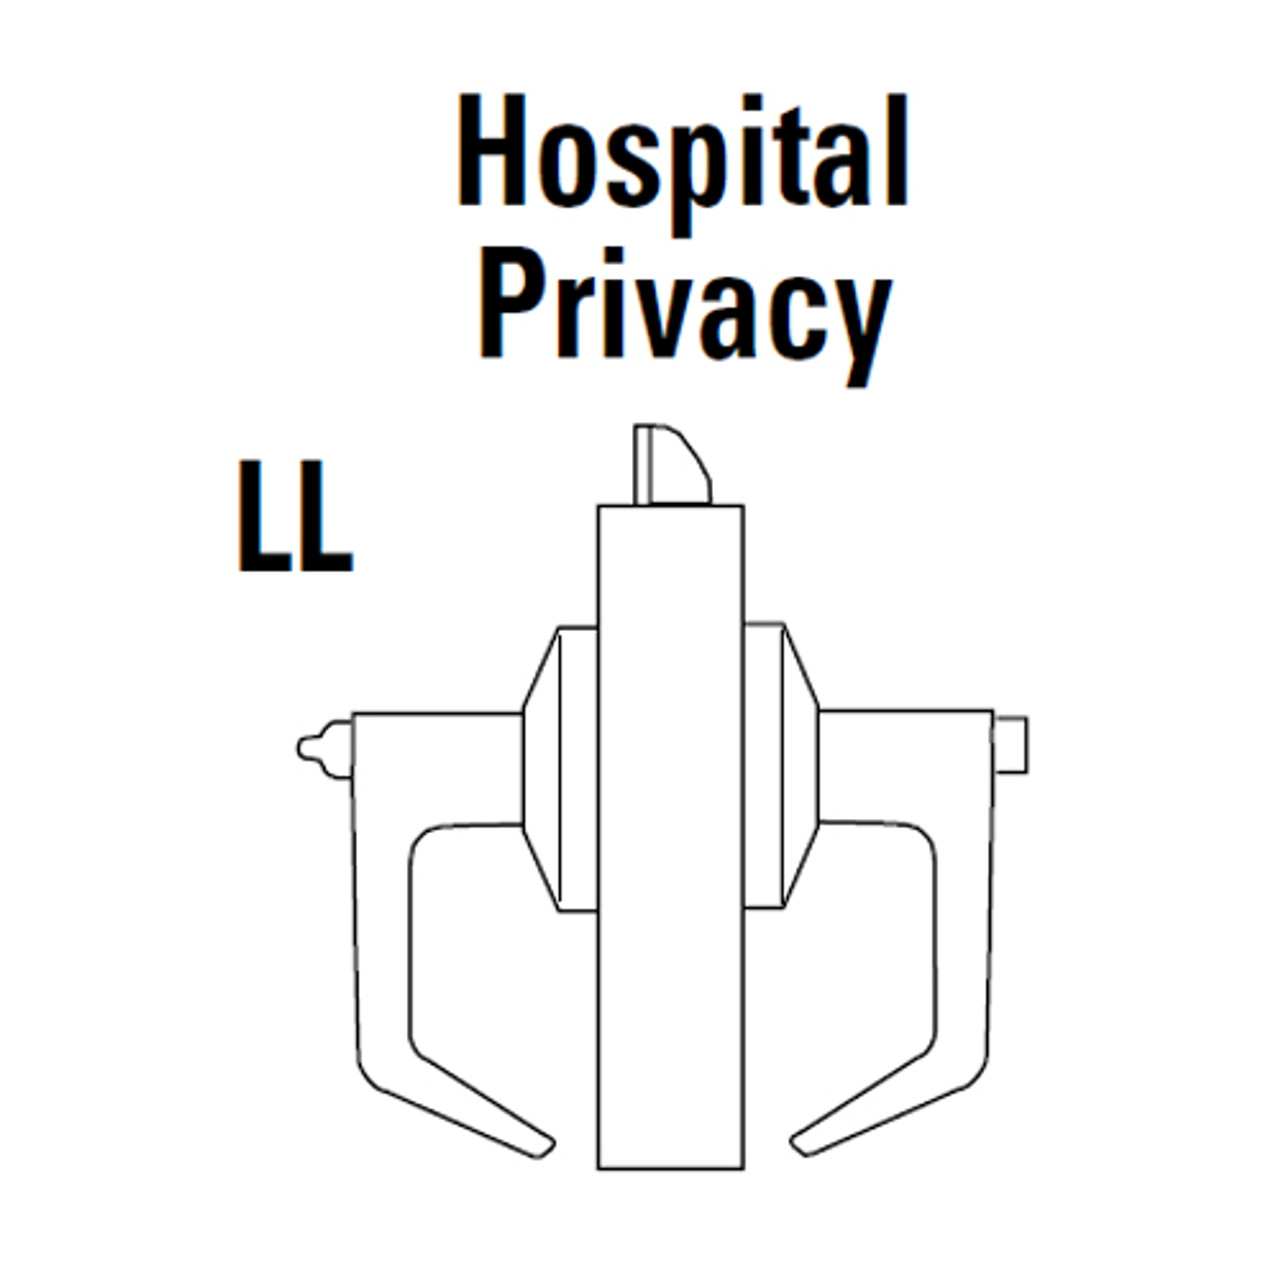 9K30LL14DS3622 Best 9K Series Hospital Privacy Heavy Duty Cylindrical Lever Locks in Black